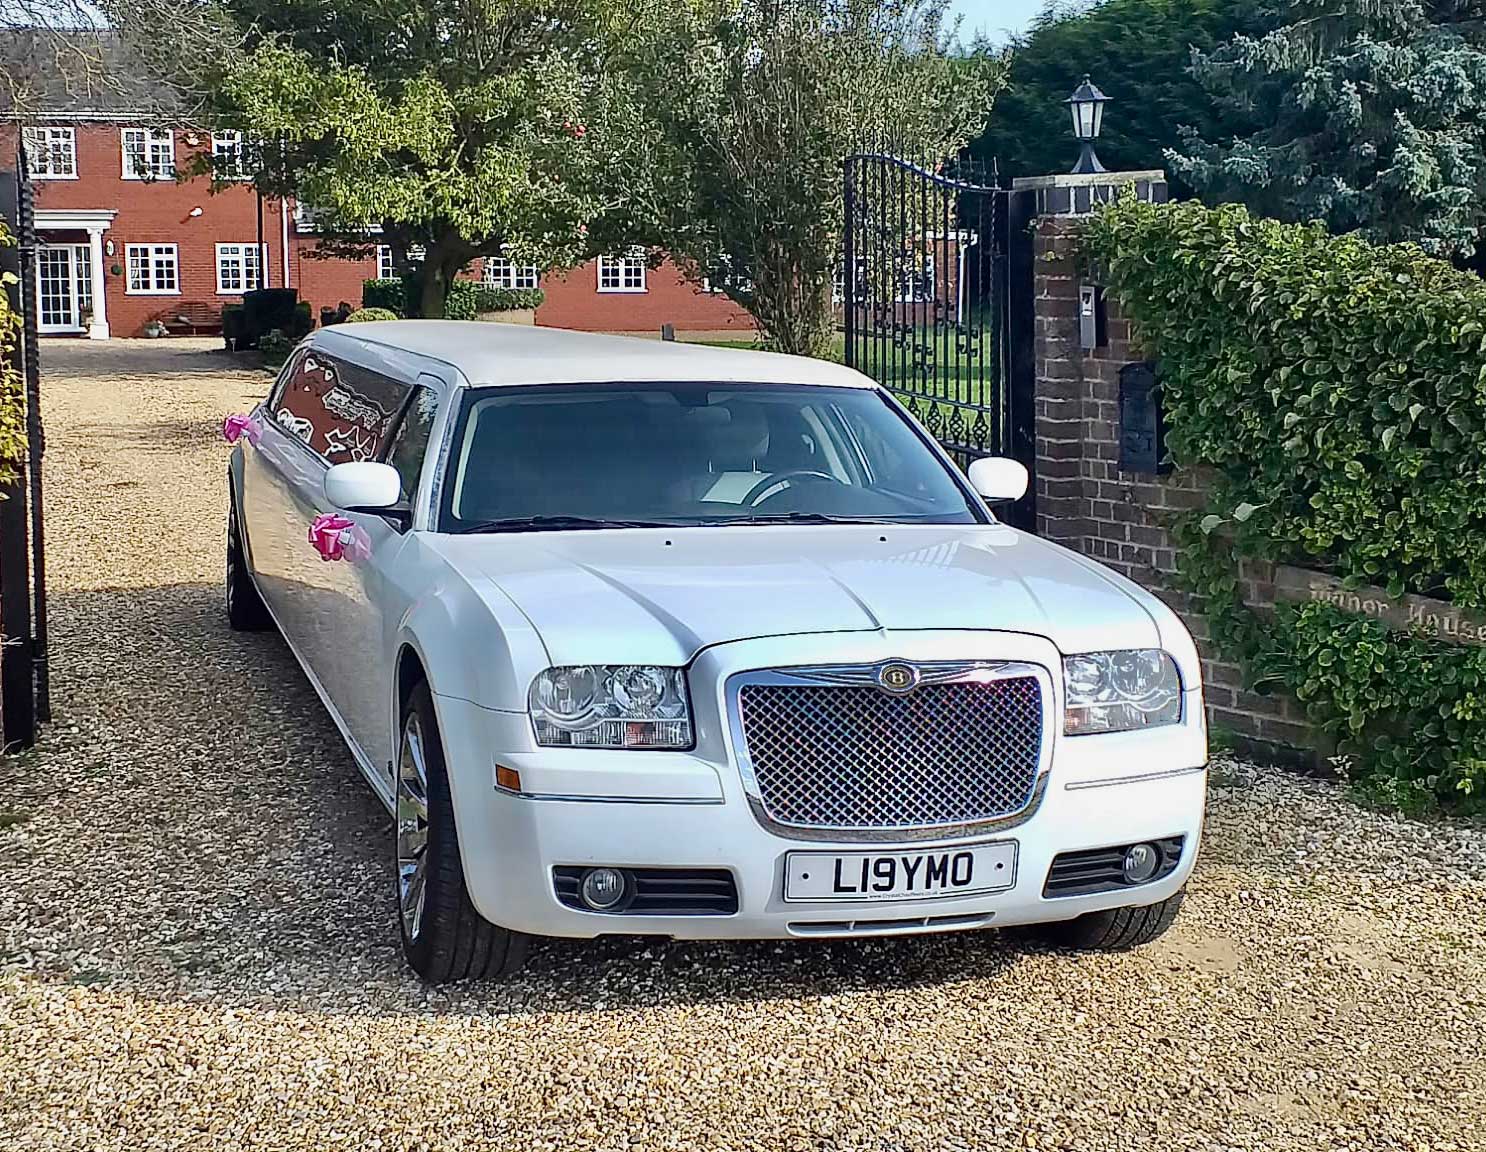 Wedding Limo Hire In March